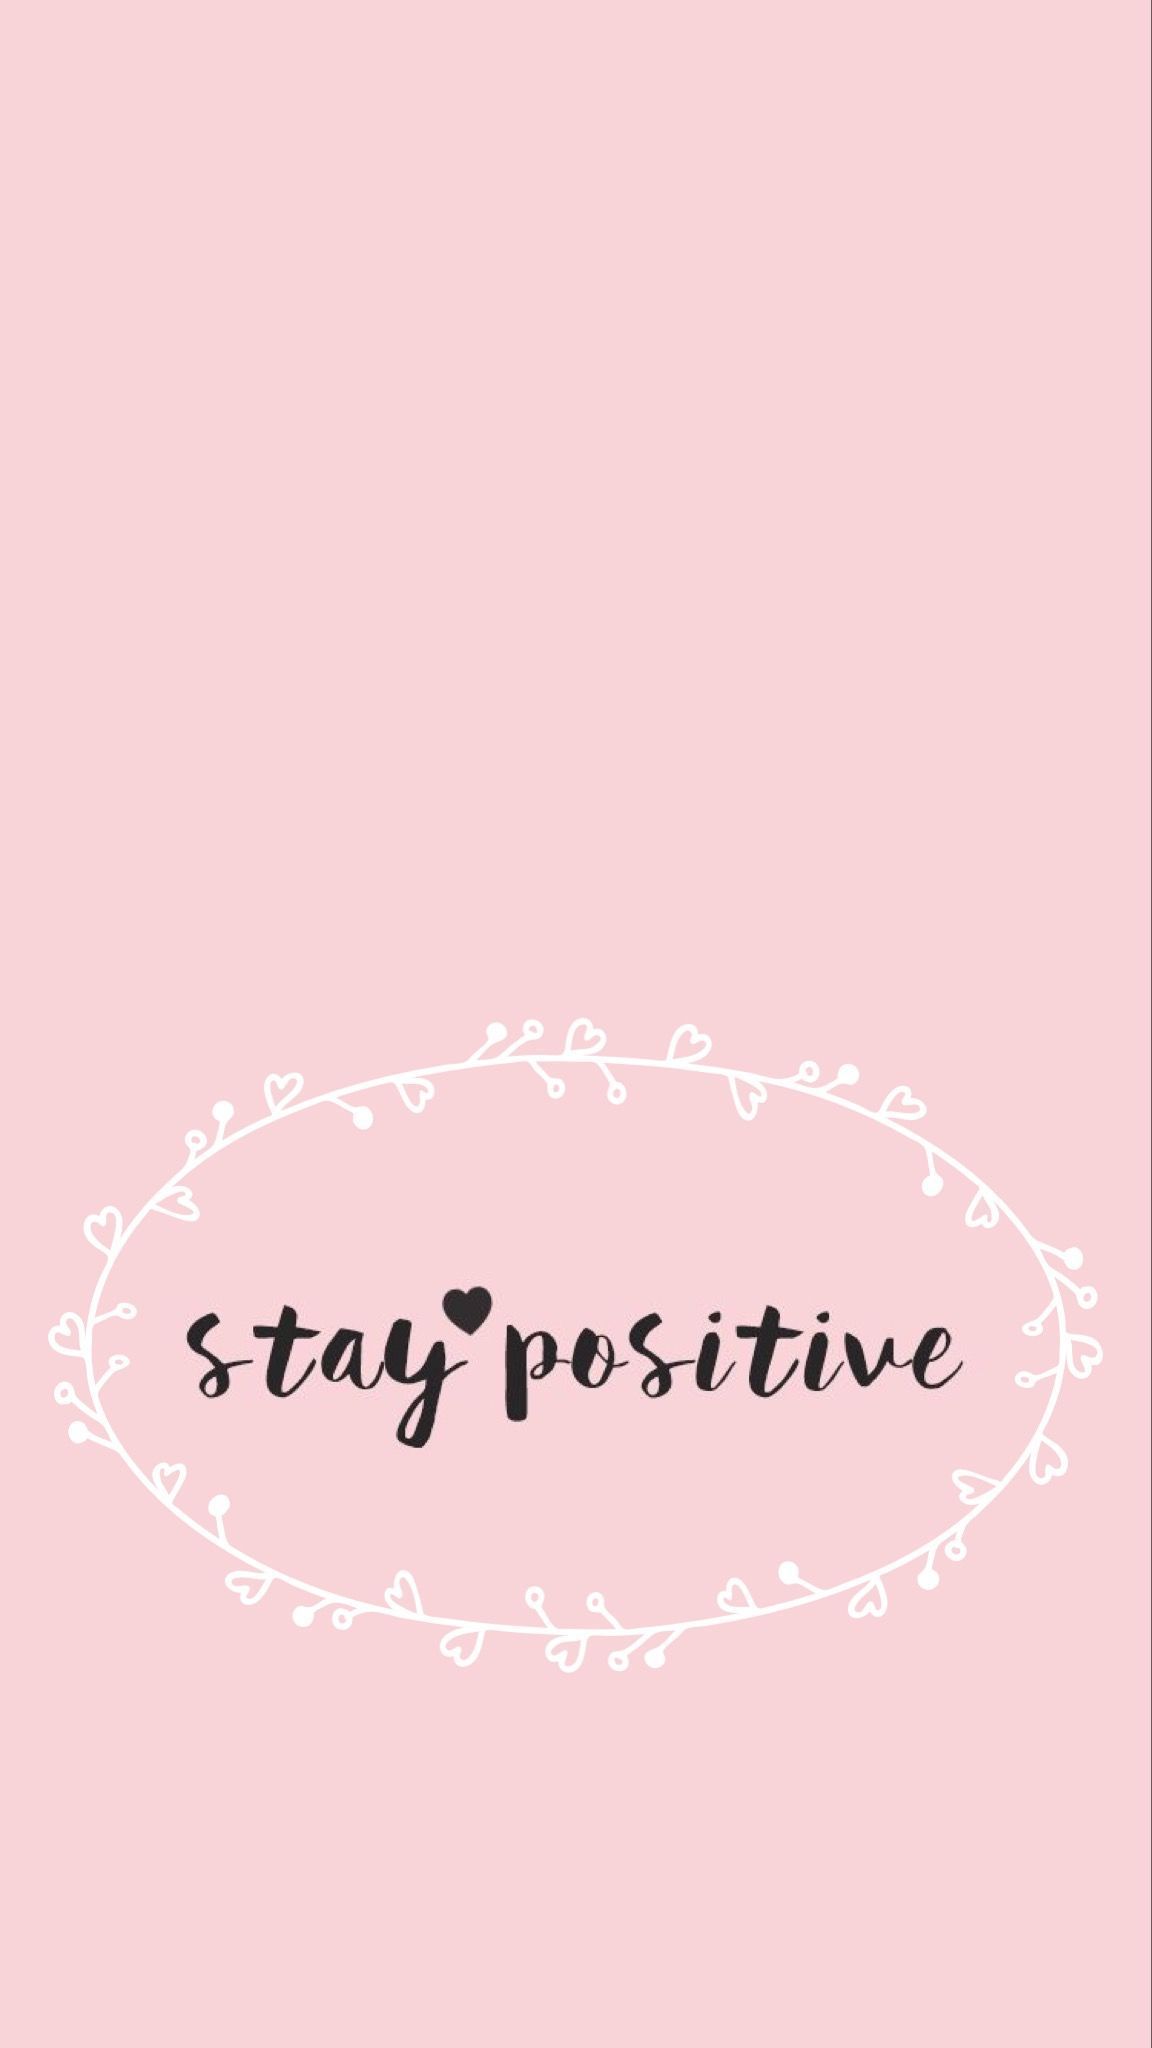 Stay positive - a pink background with white text - Positivity